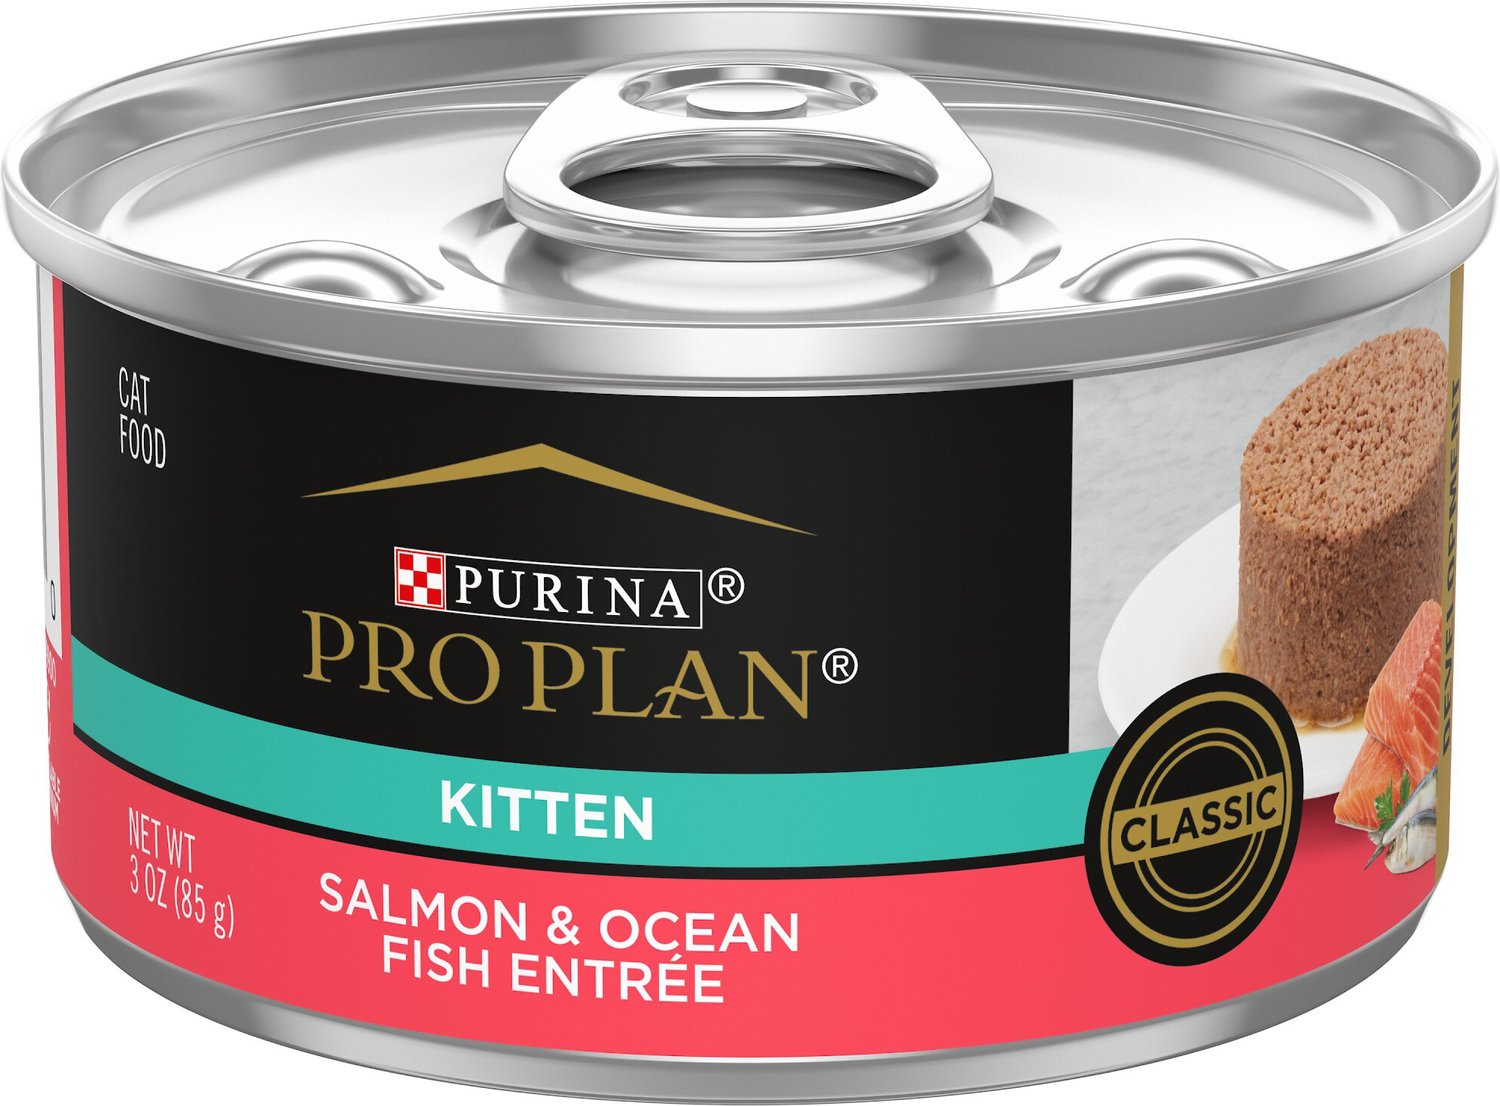 Purina Pro Plan Focus Kitten Classic Salmon & Ocean Fish Entree Canned Cat Food, 3-oz, case of 24 By Purina Pro Plan
